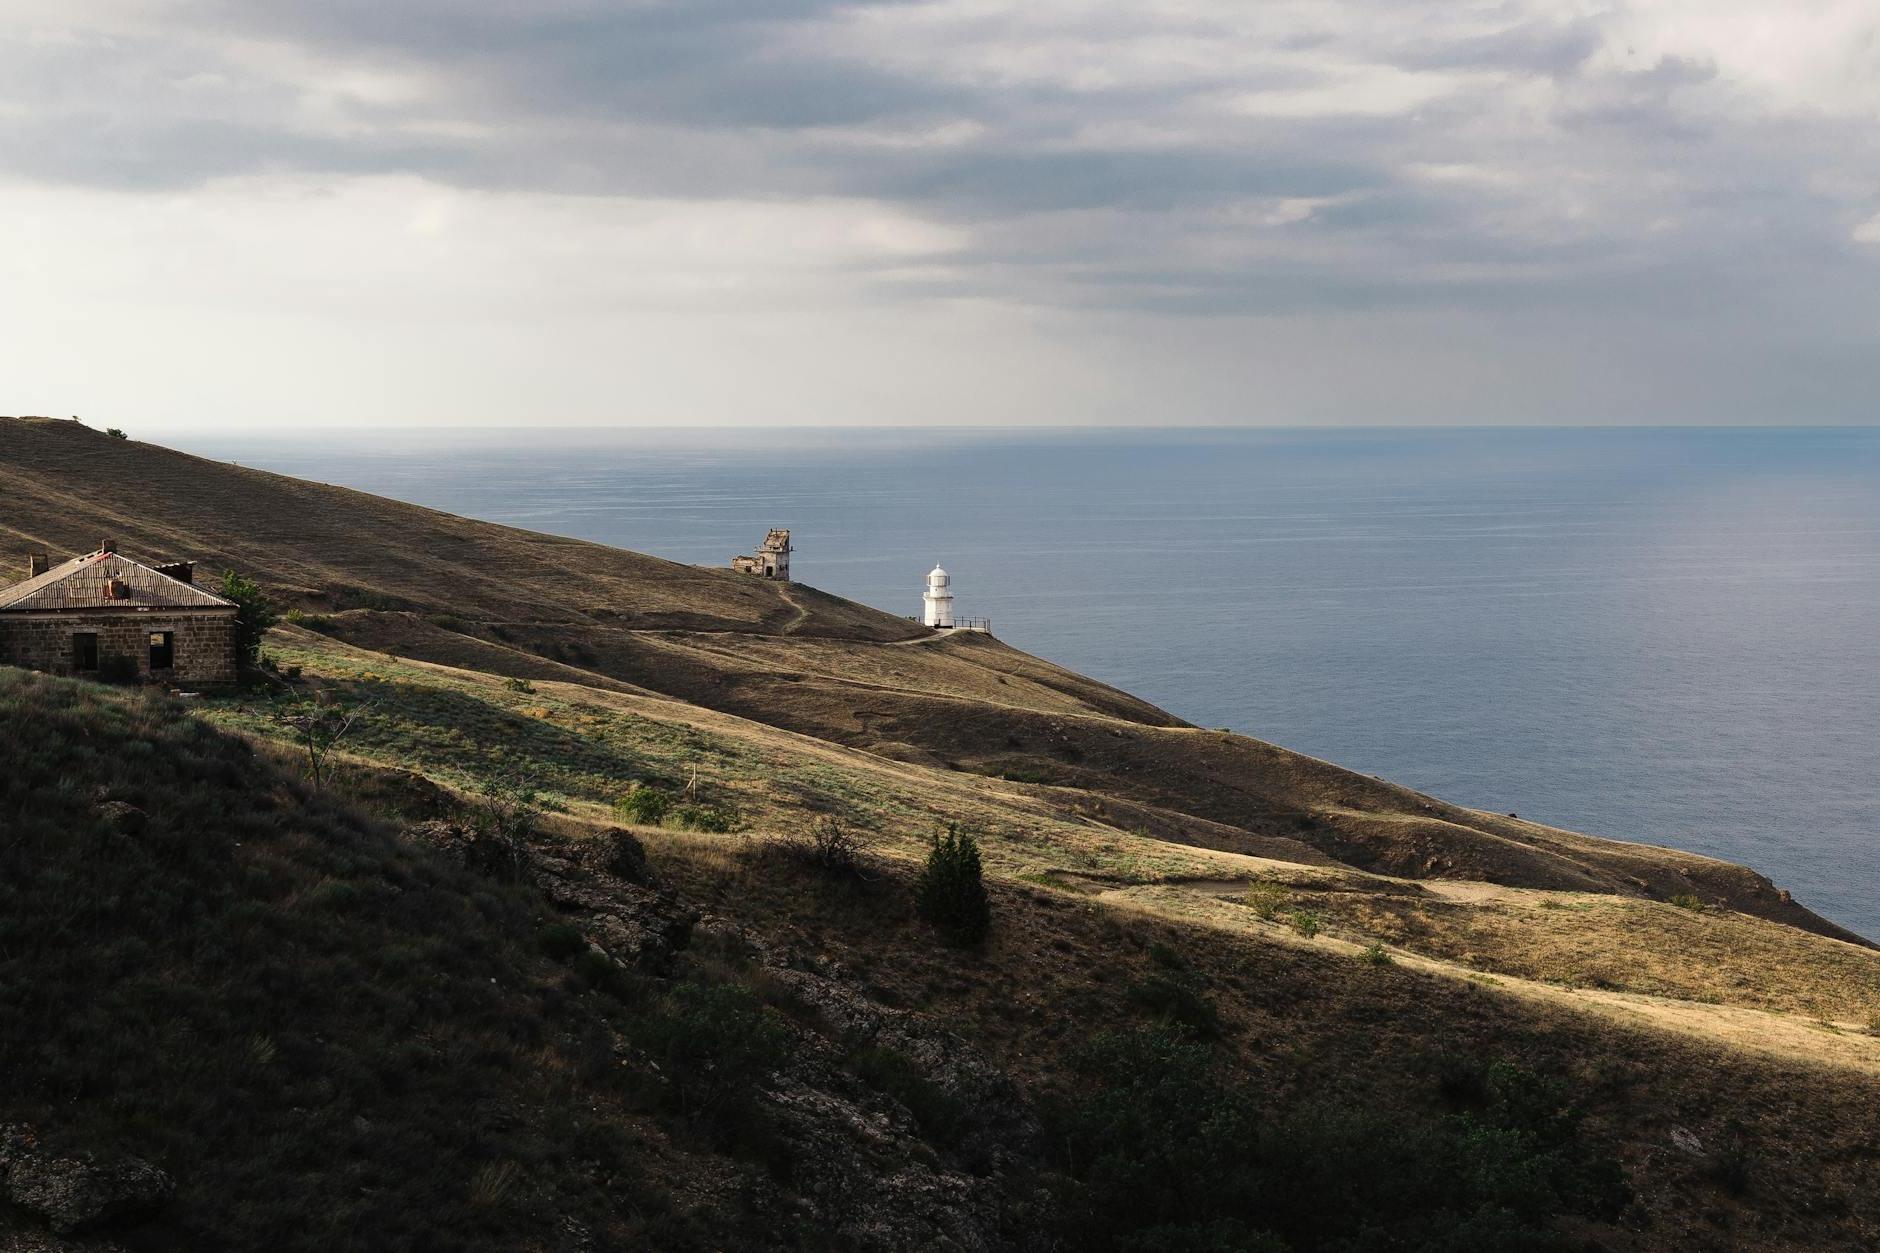 A lighthouse on a hill overlooking the ocean